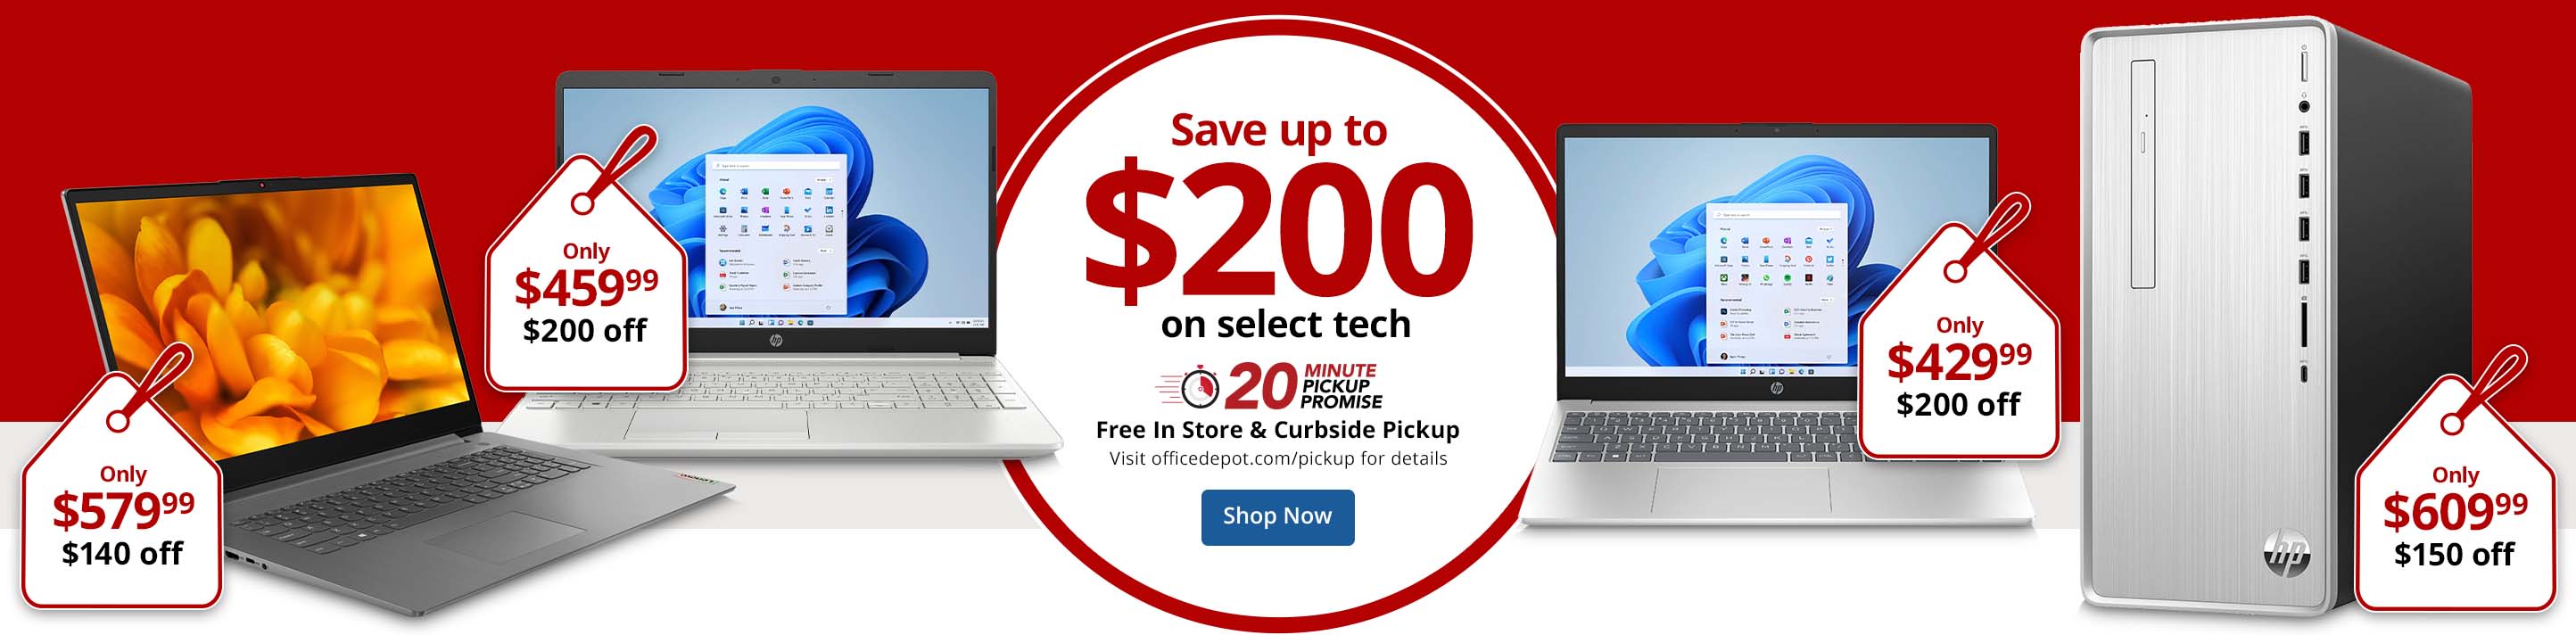 Save up to $200 on select tech